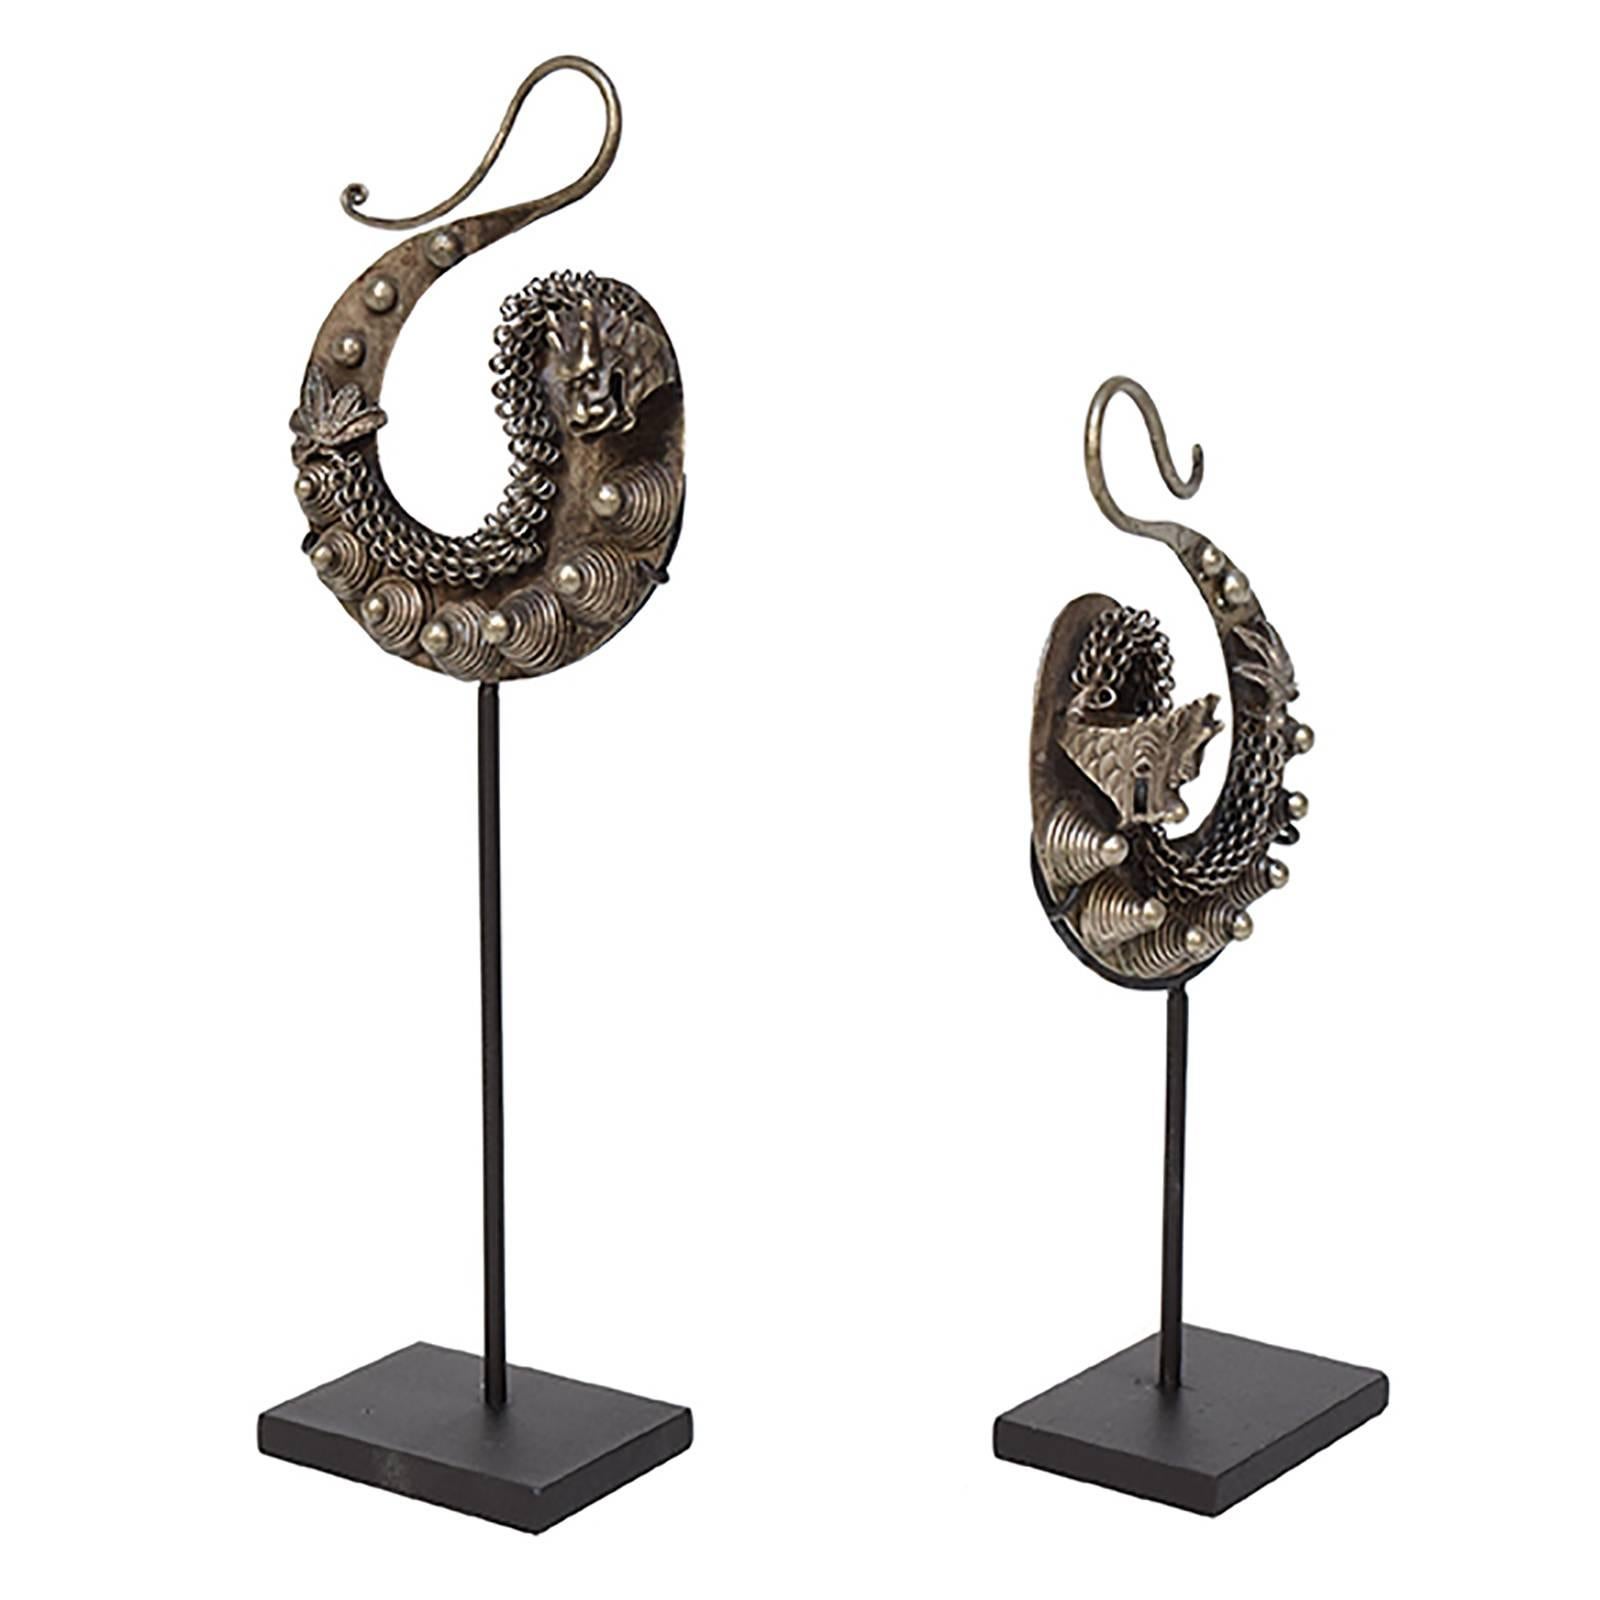 These delicate, handmade silver rounds, decorated with sinuous dragons, reflect the unique culture of the Miao people of southern China, one of China’s many minority groups. The ornate objects, once used as earrings, make a striking statement as